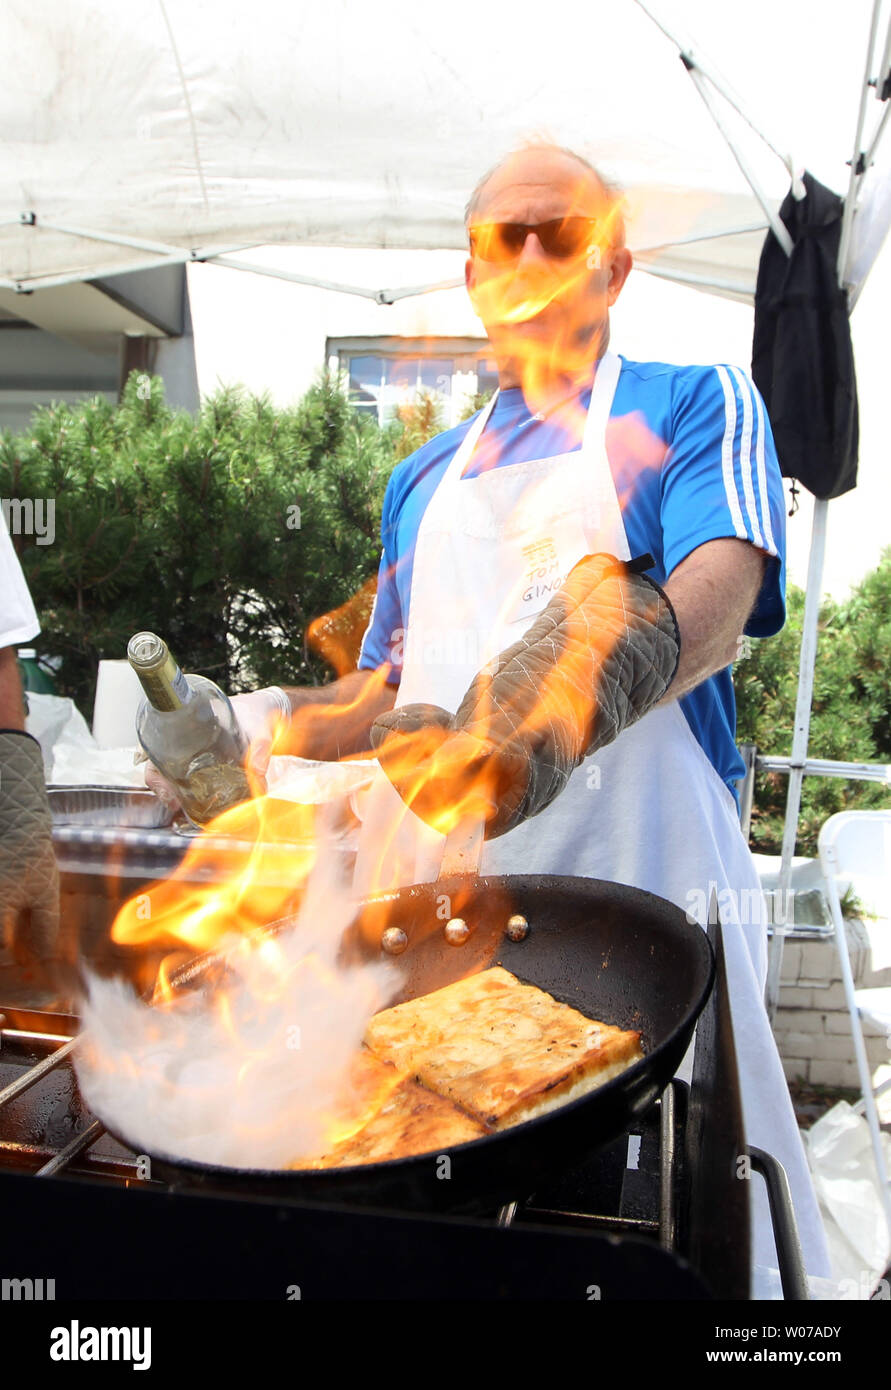 Tom Ginos creates a flame over the fried cheese as he cooks at the Greek Festival in St. Louis on September 2, 103. The annual festival drew record numbers for a single day due to the cooler weather. UPI/Bill Greenblatt Stock Photo